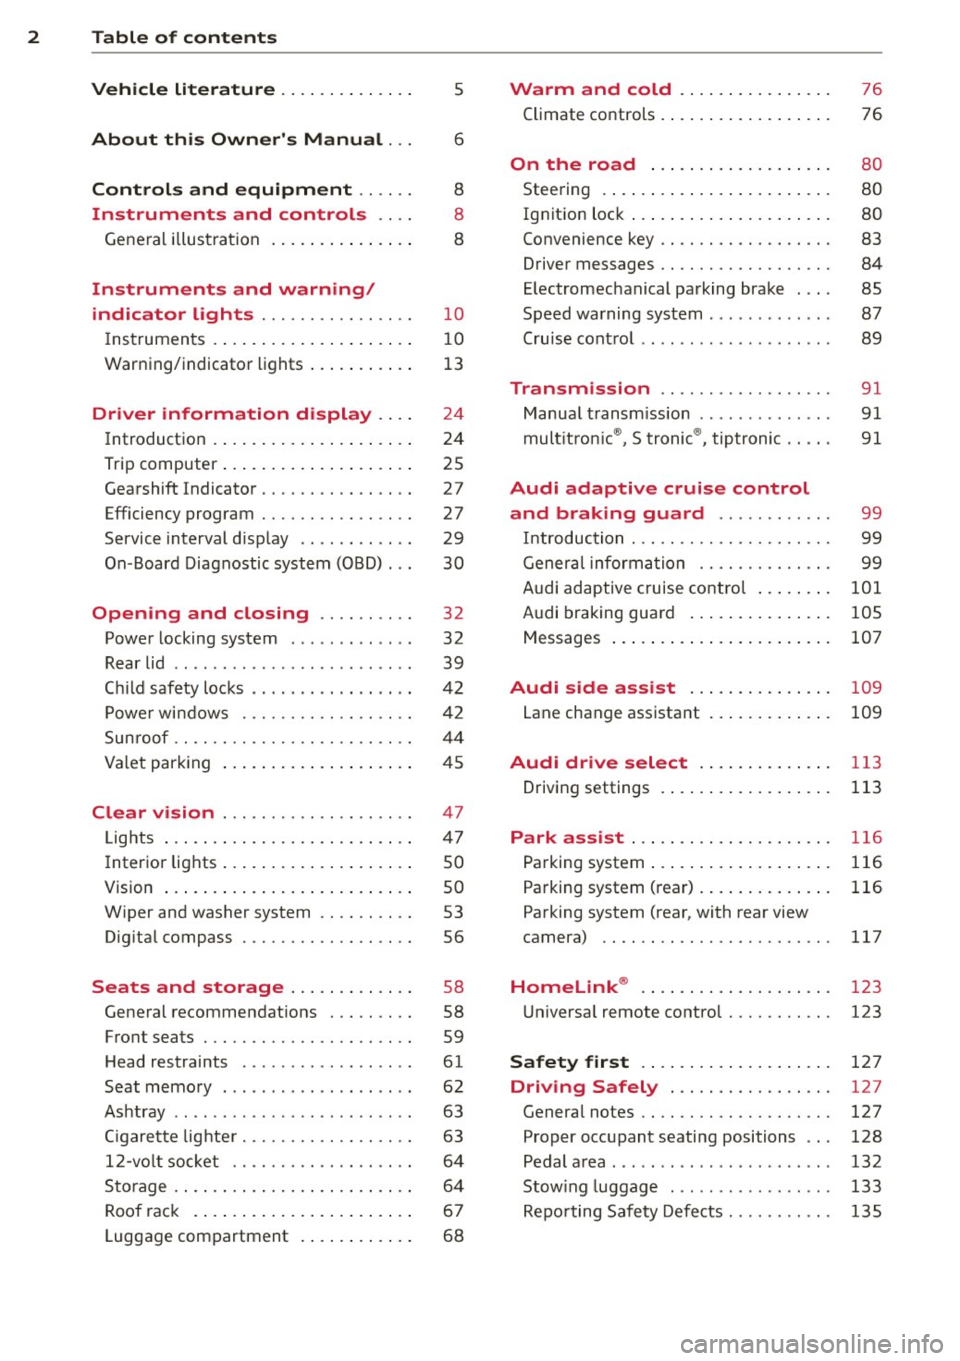 AUDI S4 2013  Owners Manual 2  Table  of  contents Vehicle  literature  .. .. .. .. .. ... . 
5 
About  this  Owners  Manual . . . 6 
Controls  and  equipment  .. ...  . 
Ins truments  and  controls  .. . . 
General  illus trat